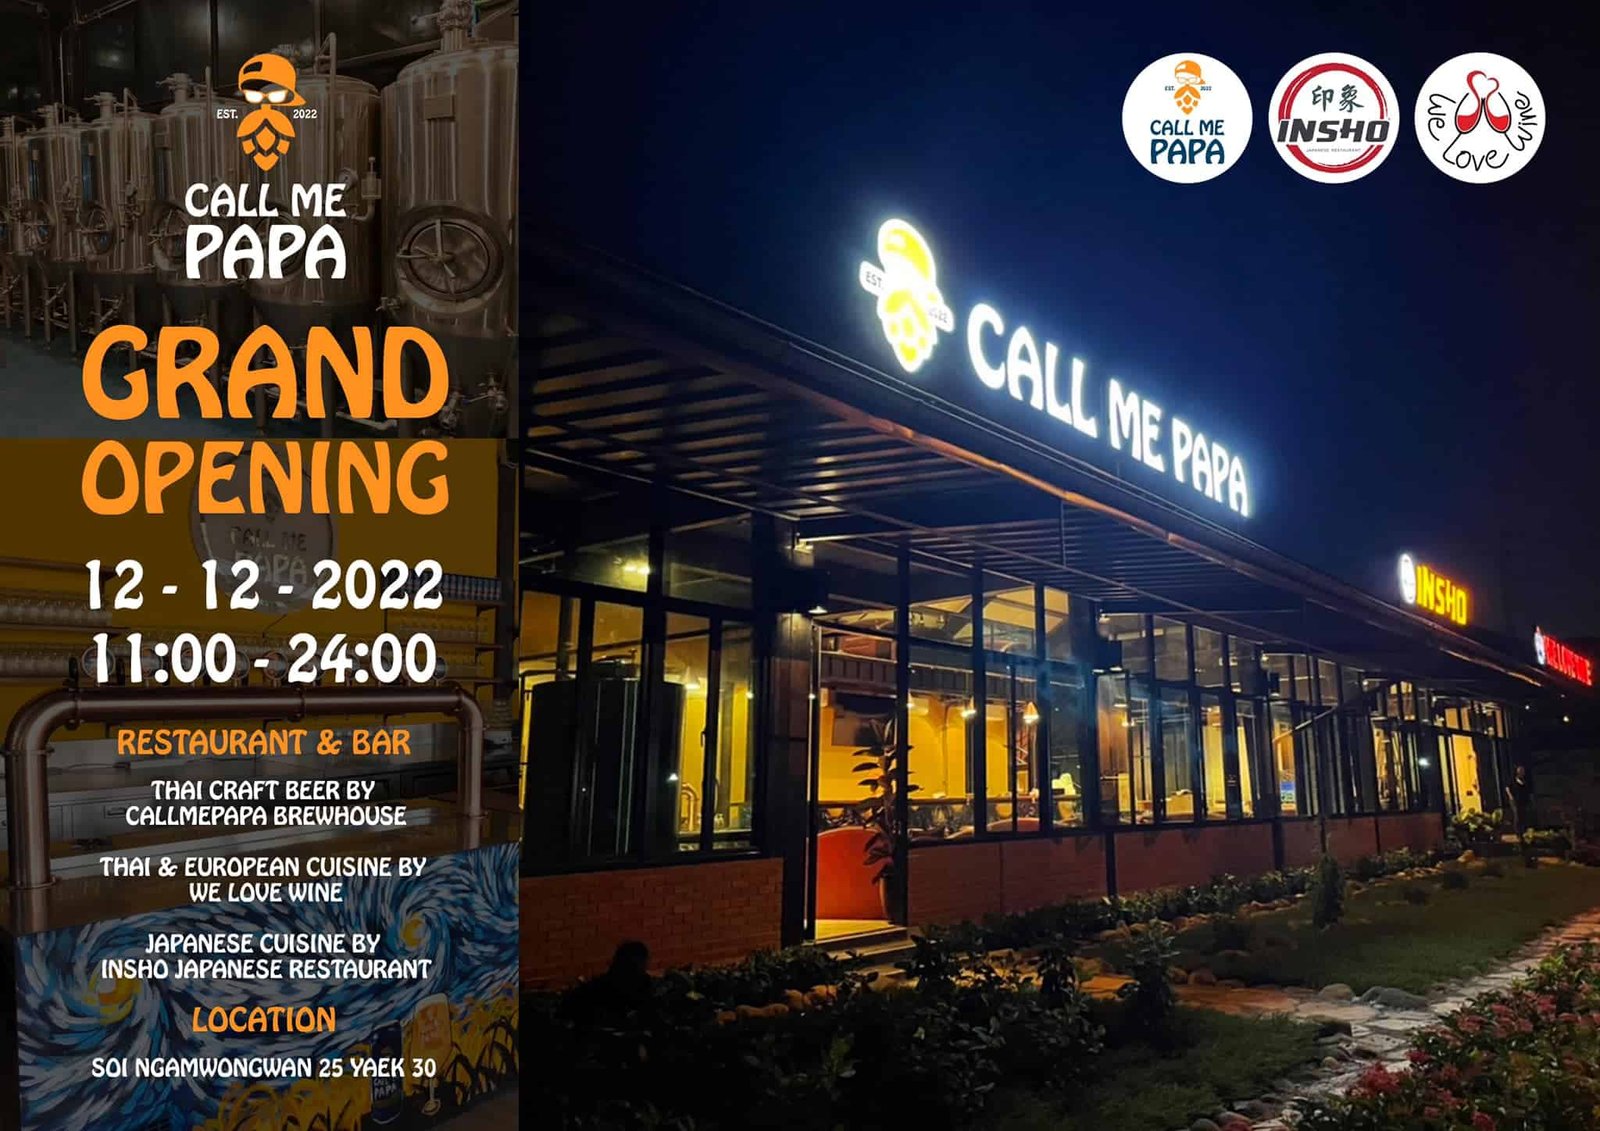 Call Me Papa craft beer brewery announces new location opening in Bangkok Thailand.